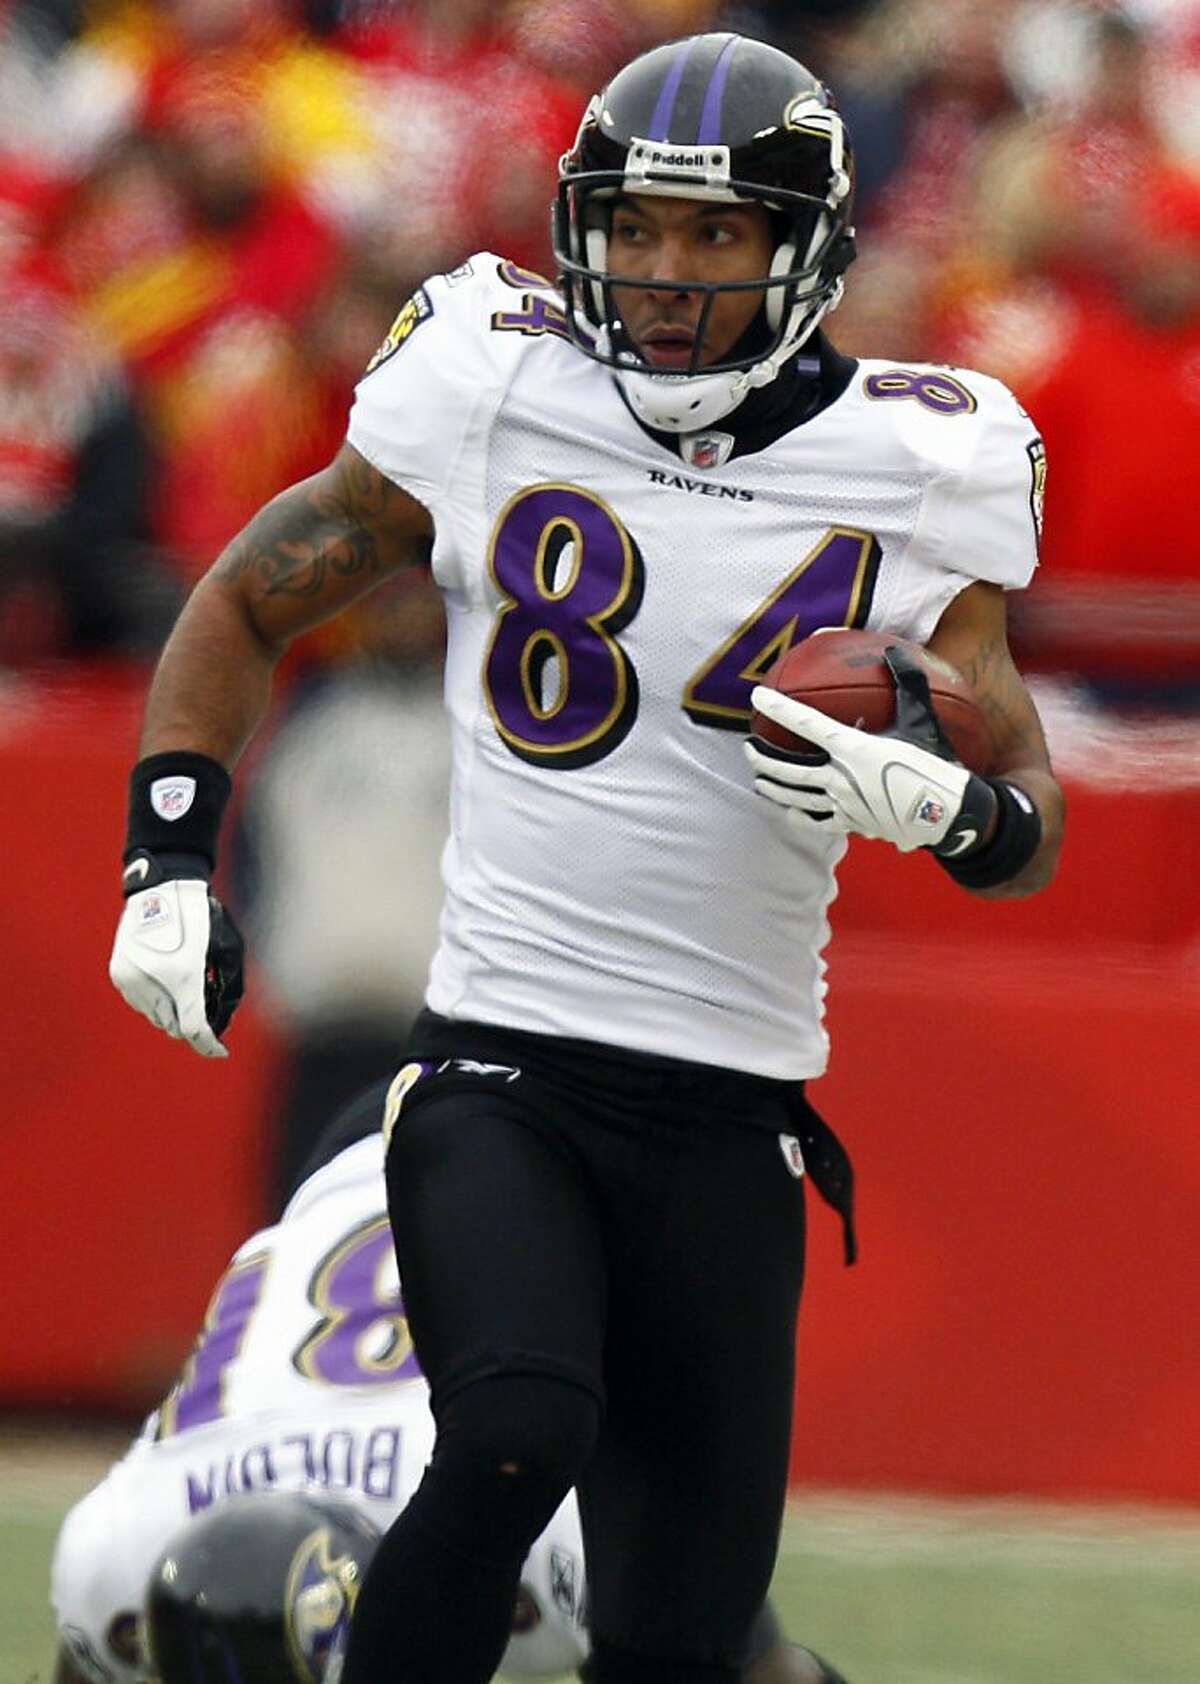 FILE - In this Jan. 9, 2011 file photo, Baltimore Ravens' T.J. Houshmandzadeh (84) runs for yardage against the Kansas City Chiefs during an NFL AFC wild card football playoff game in Kansas City, Mo. The Oakland Raiders have signed Houshmandzadeh to a contract, the team announced Tuesday, Nov. 1, 2011, after watching the wide receiver work out. The deal reunites Houshmandzadeh with Raiders quarterback Chris Palmer, who was his teammate in Cincinnati for six seasons. (AP Photo/Ed Zurga, File) Ran on: 11-02-2011 T.J. Houshmandzadeh signed with the Raiders on Tuesday. Ran on: 11-02-2011 T.J. Houshmandzadeh signed with the Raiders on Tuesday.